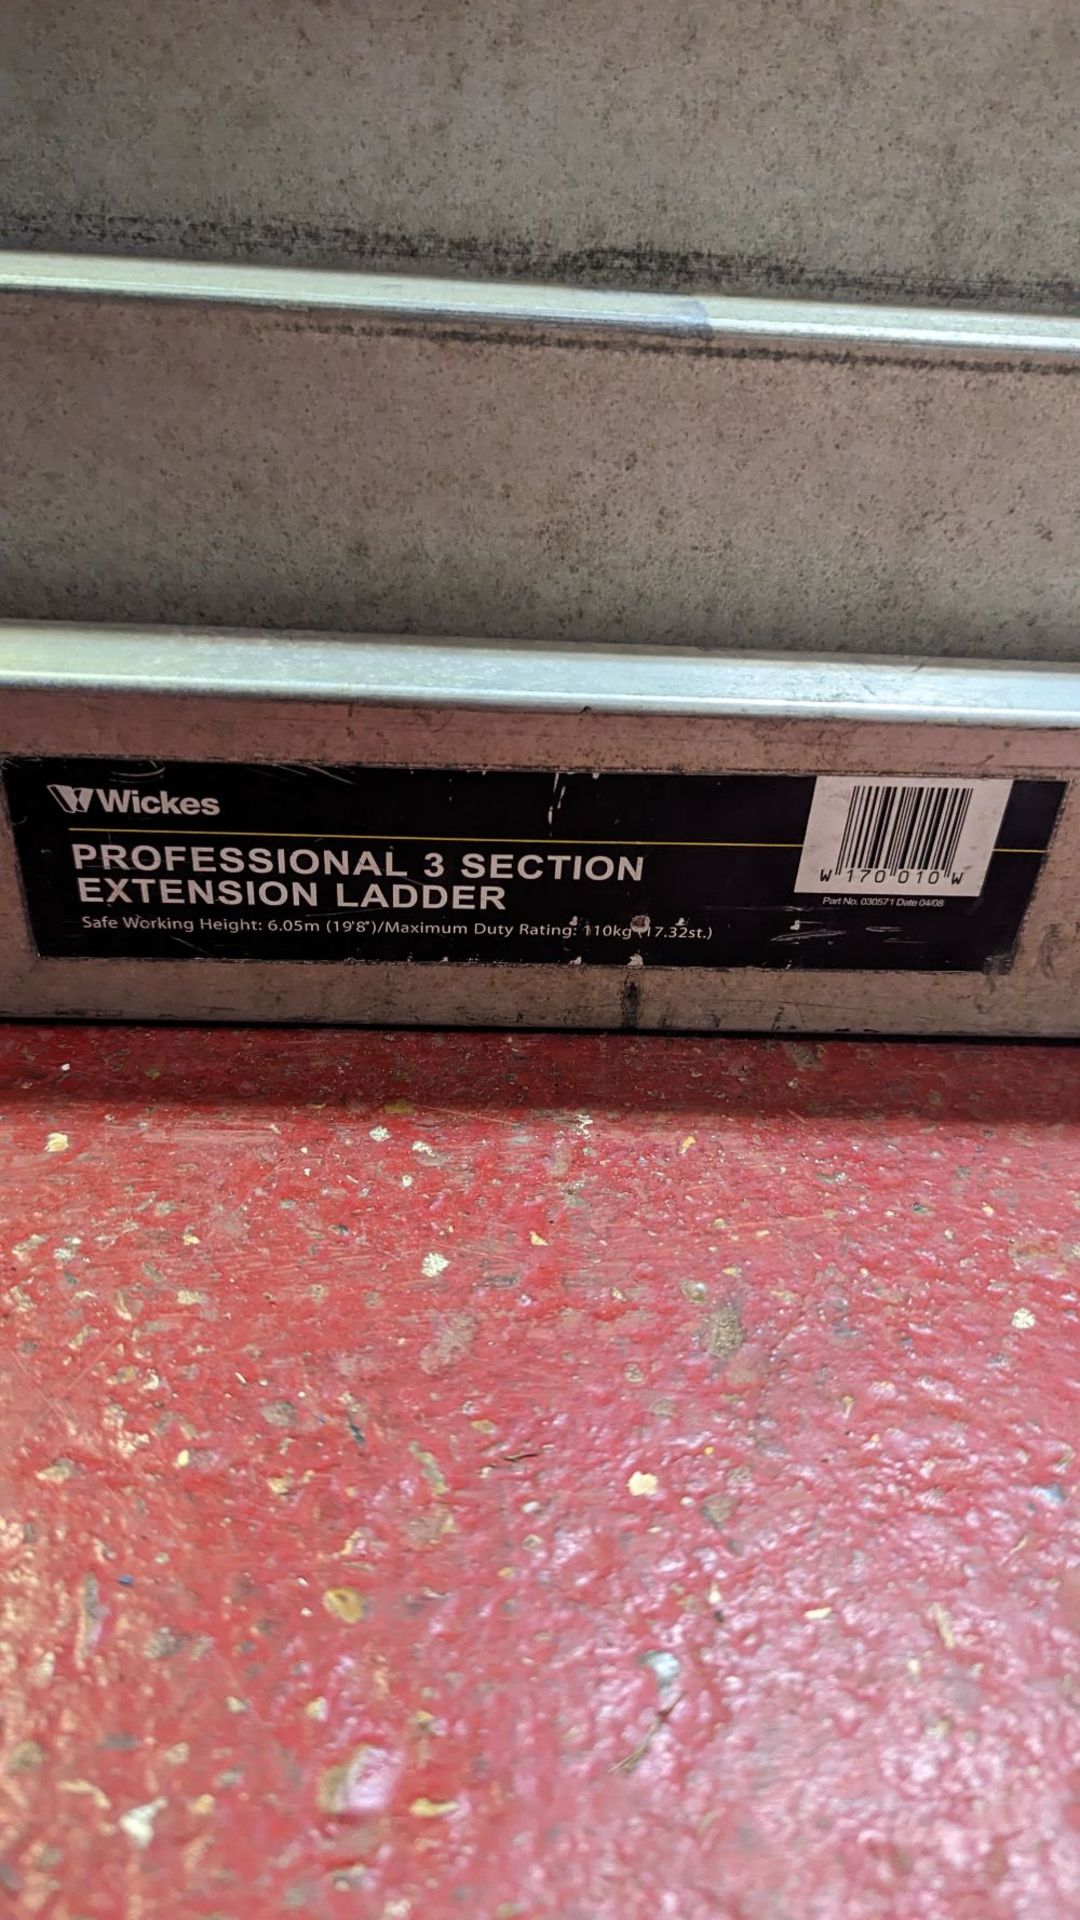 Wickes professional three section extension ladder - Image 3 of 3